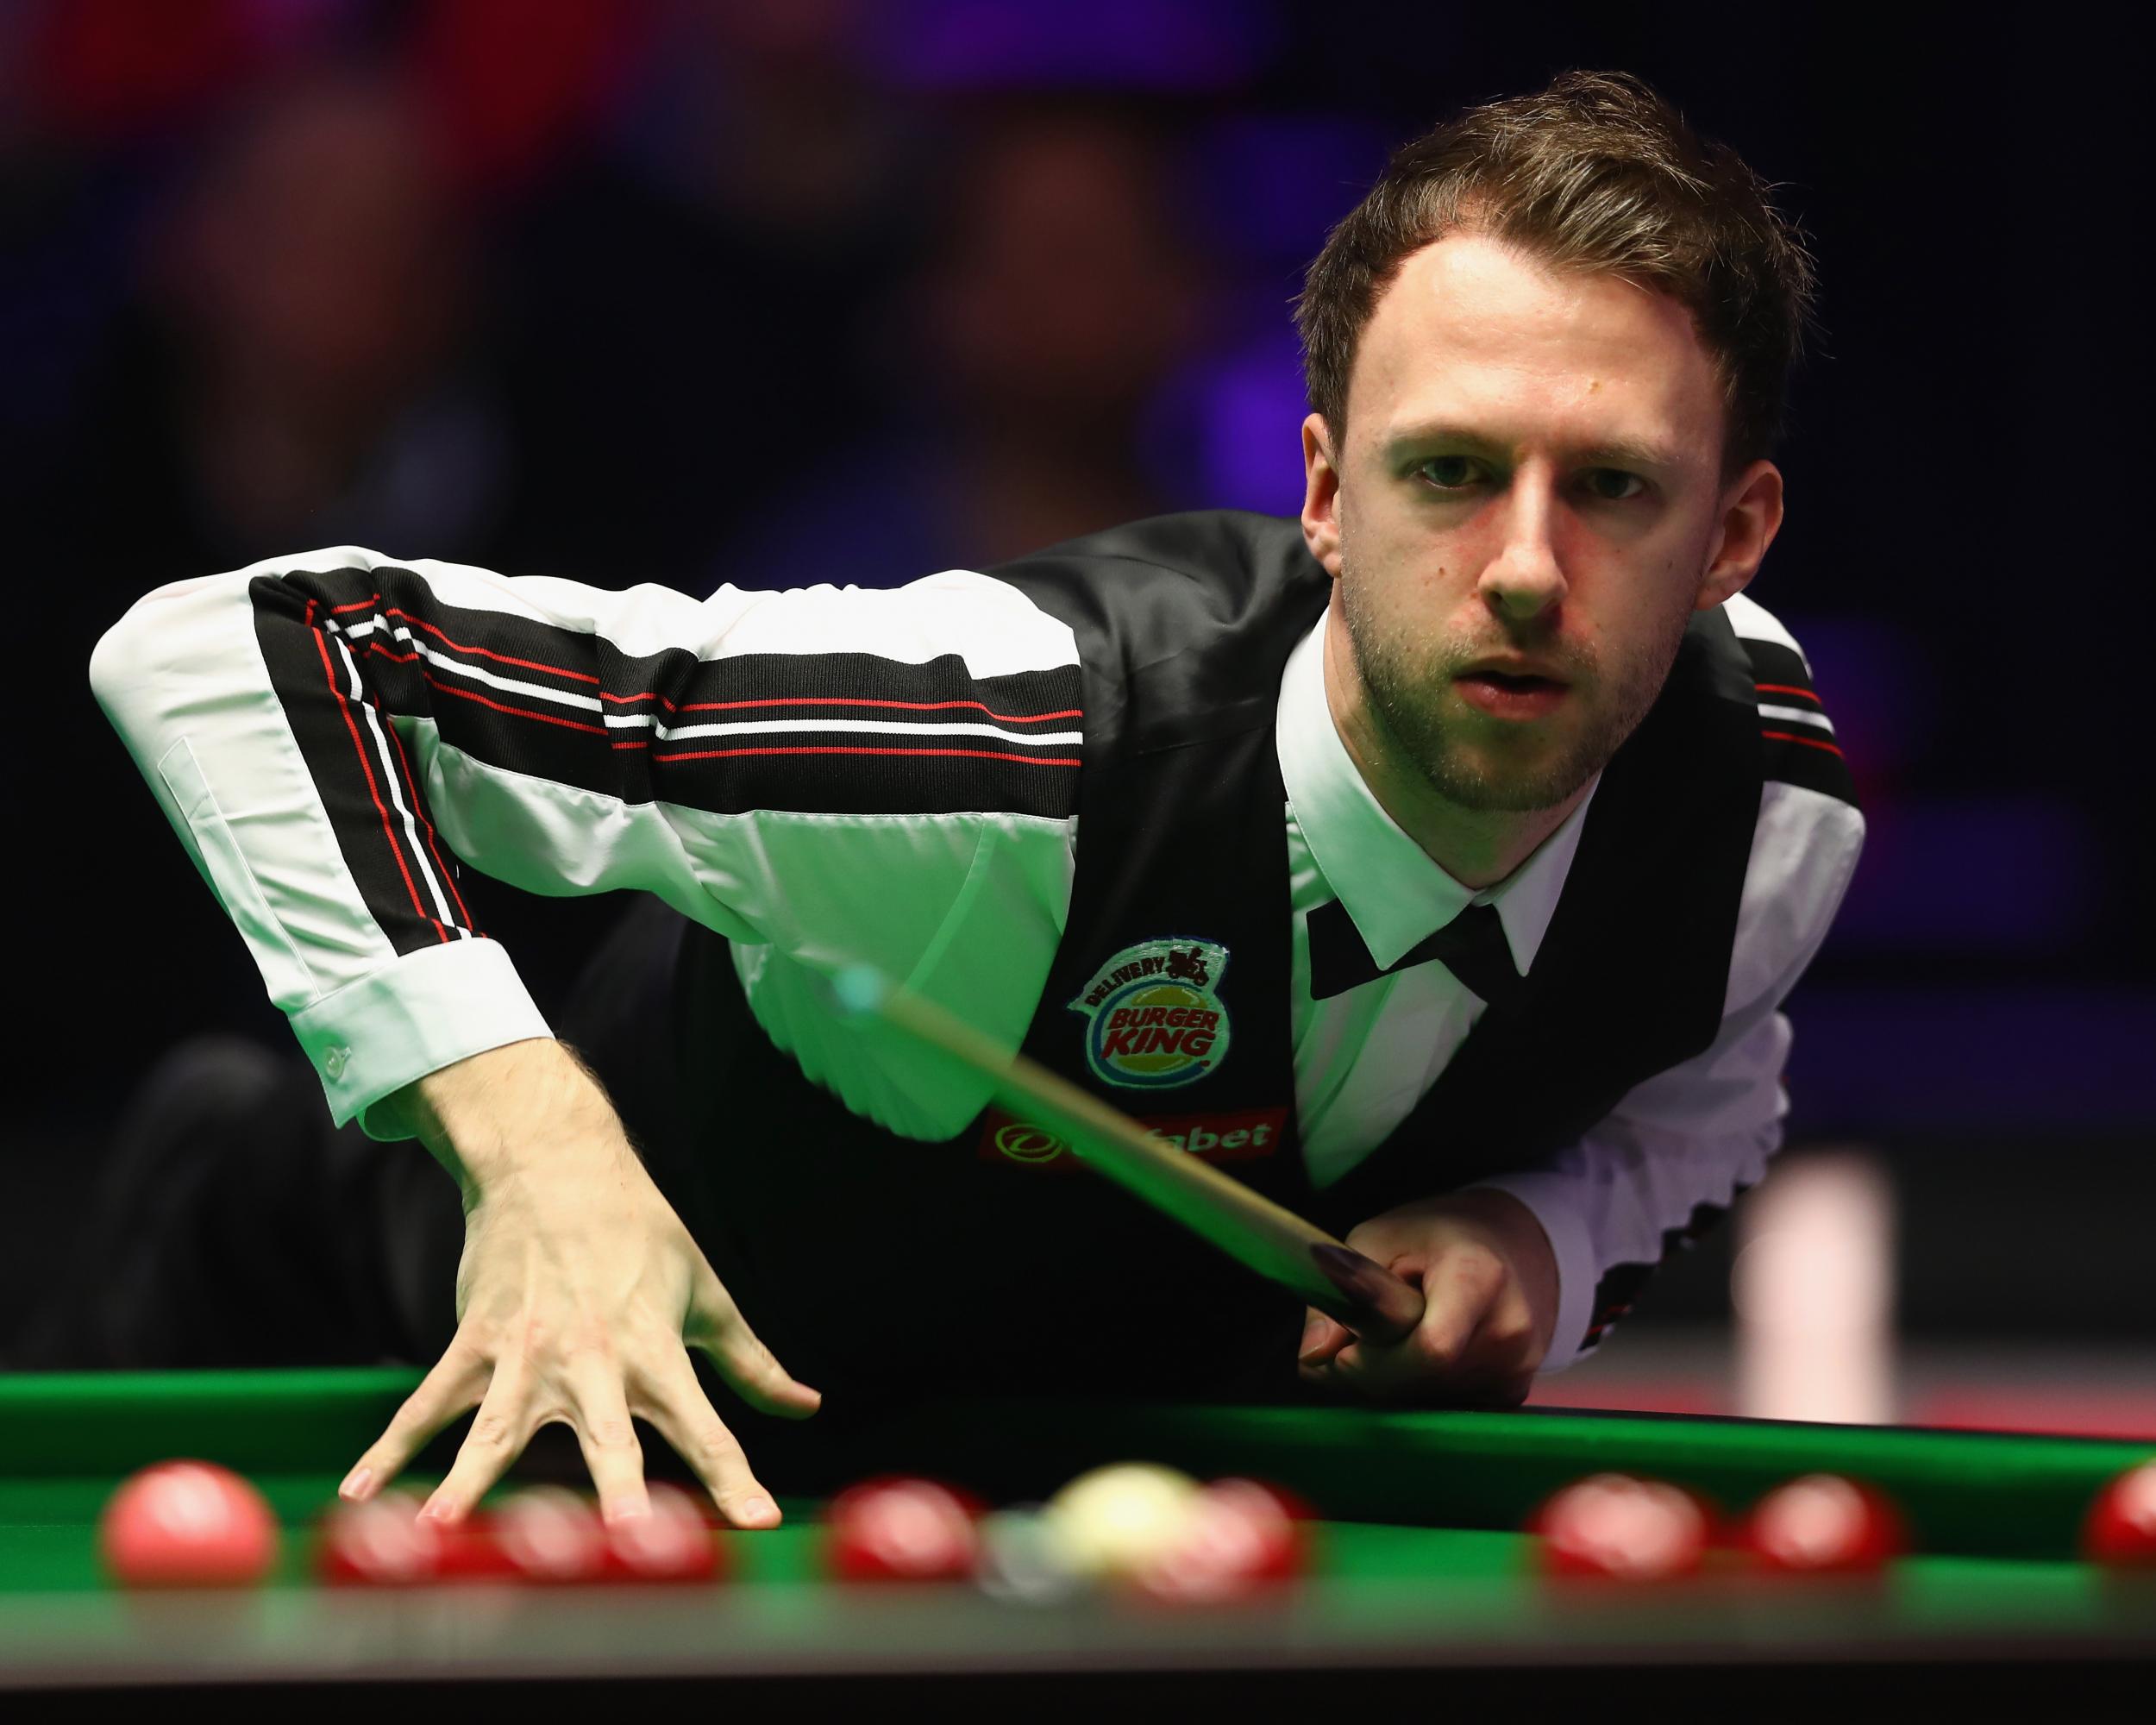 &#13;
Judd Trump will be in action &#13;